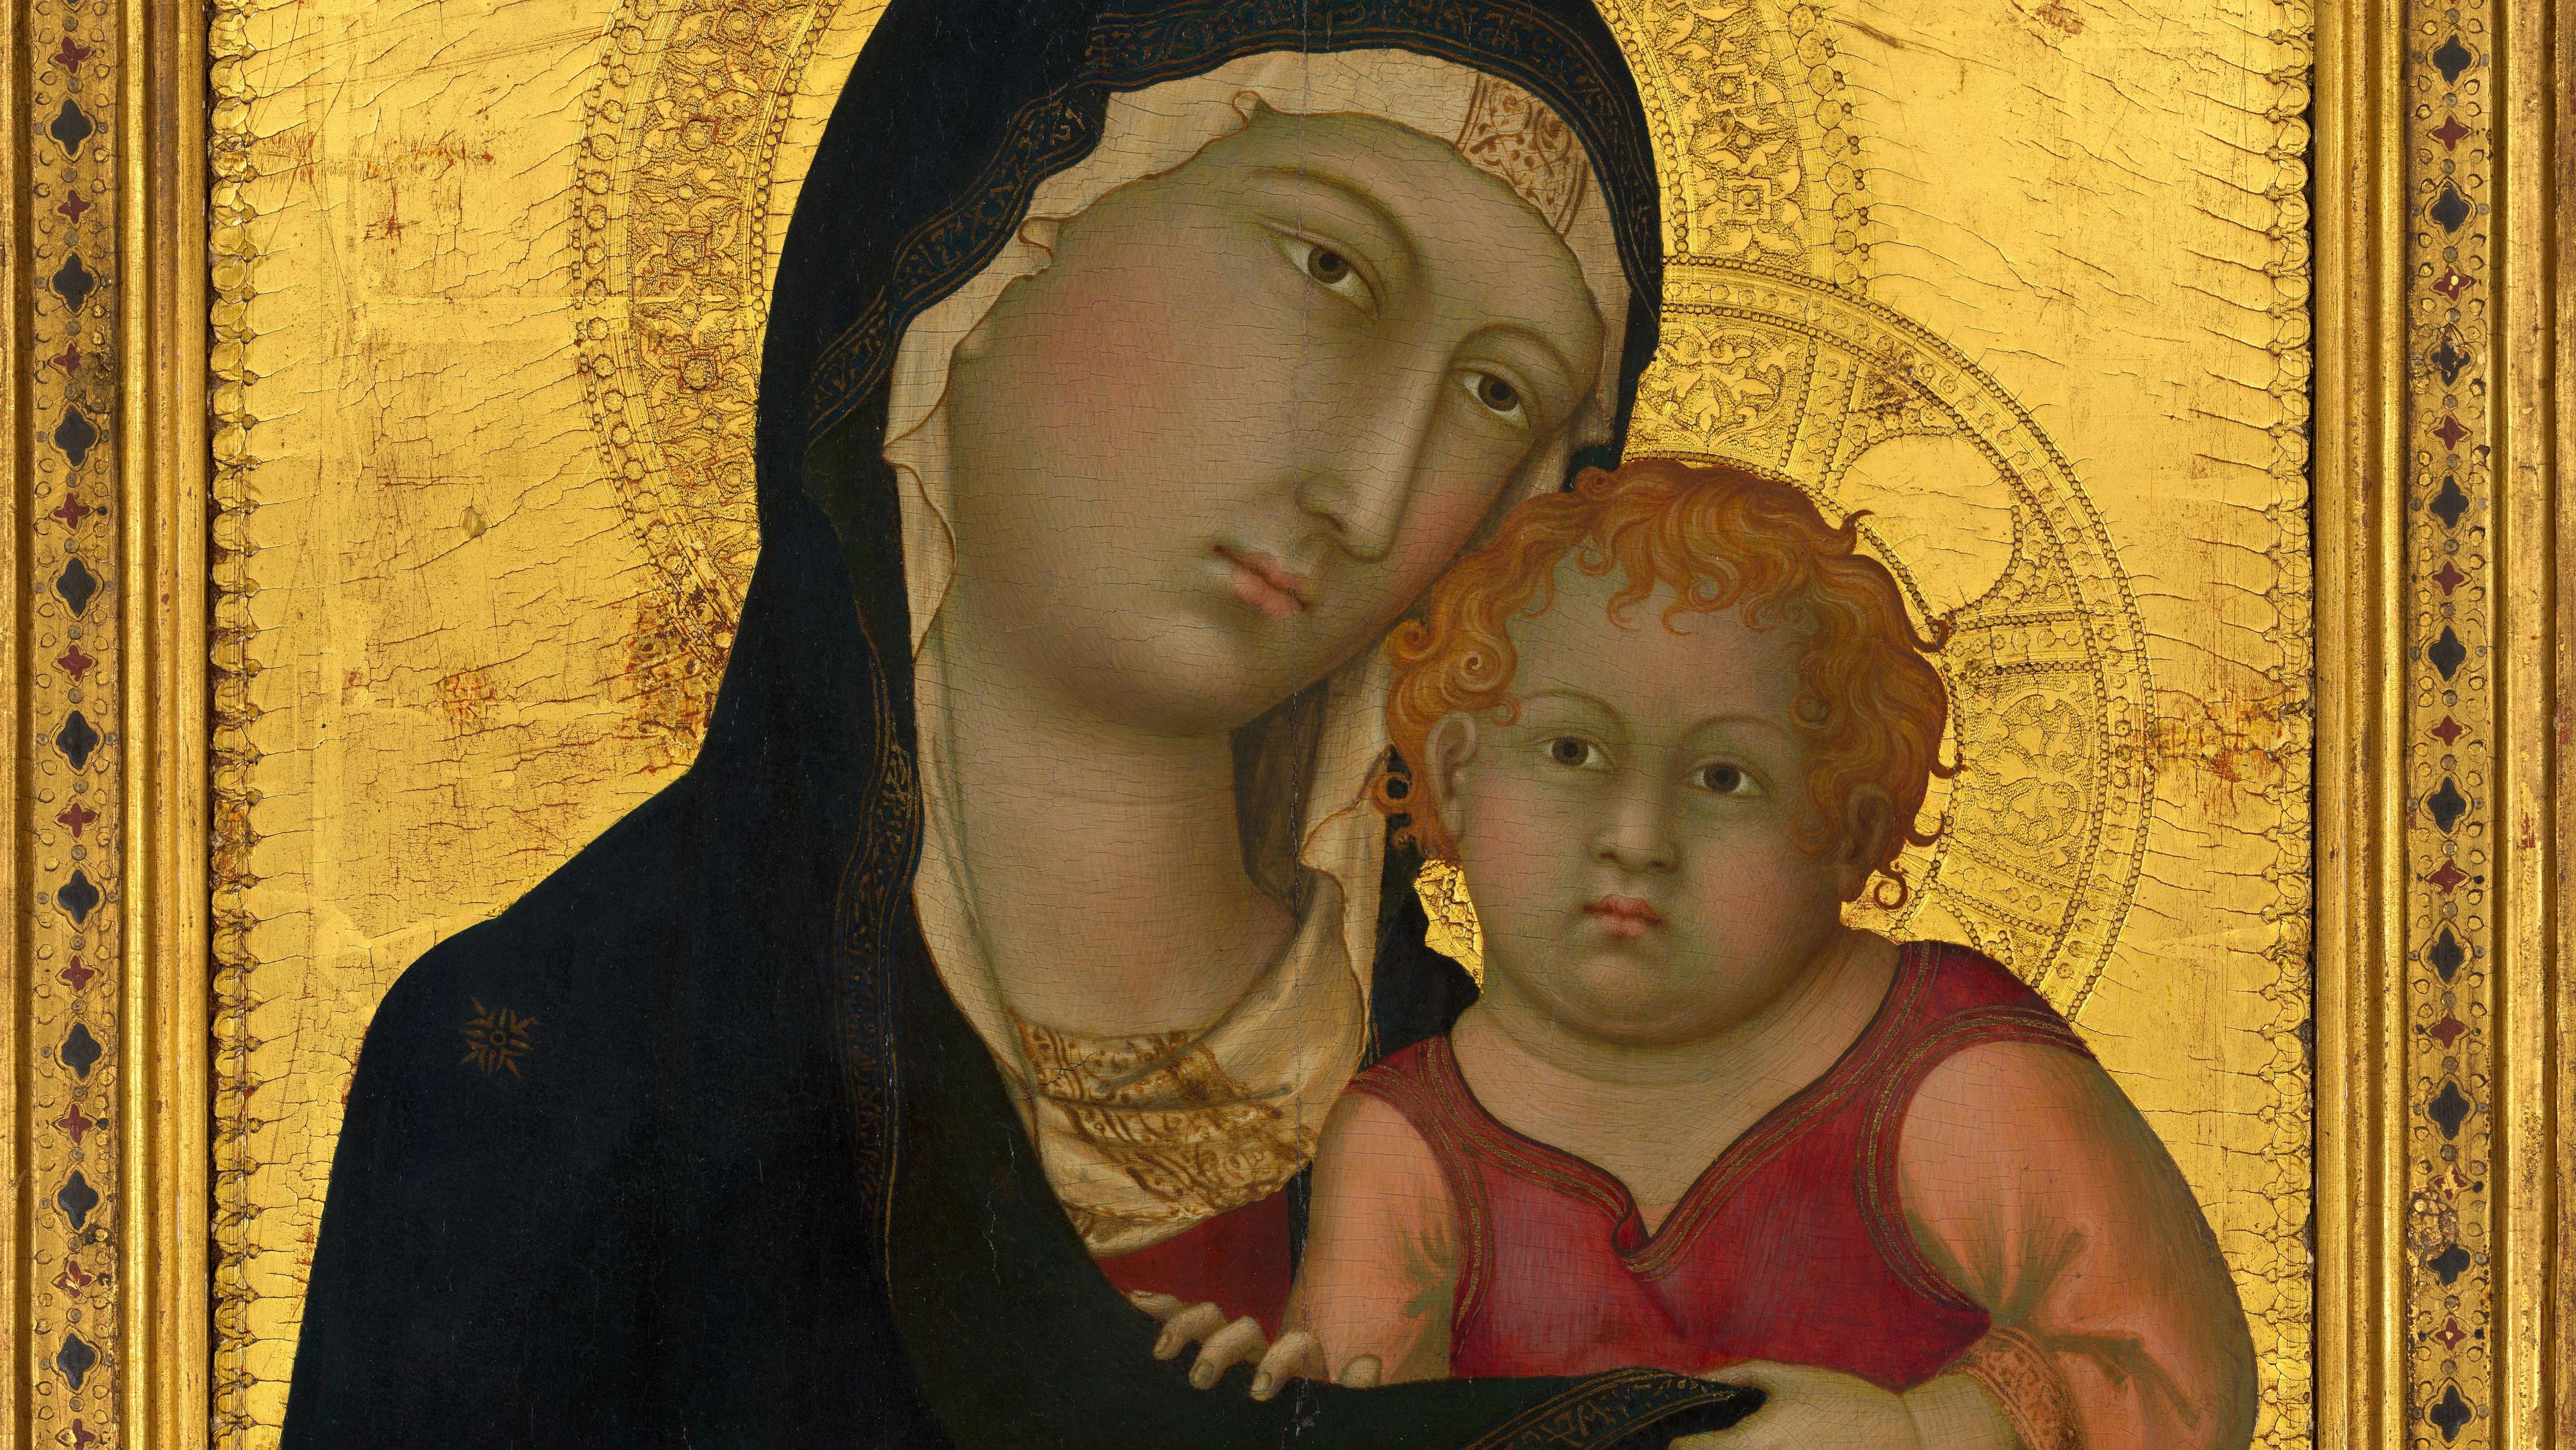 A medieval painting of the madonna and child, featuring the virgin mary in a blue mantle holding the infant jesus clad in red, set against a gold-leaf background adorned with intricate patterns.